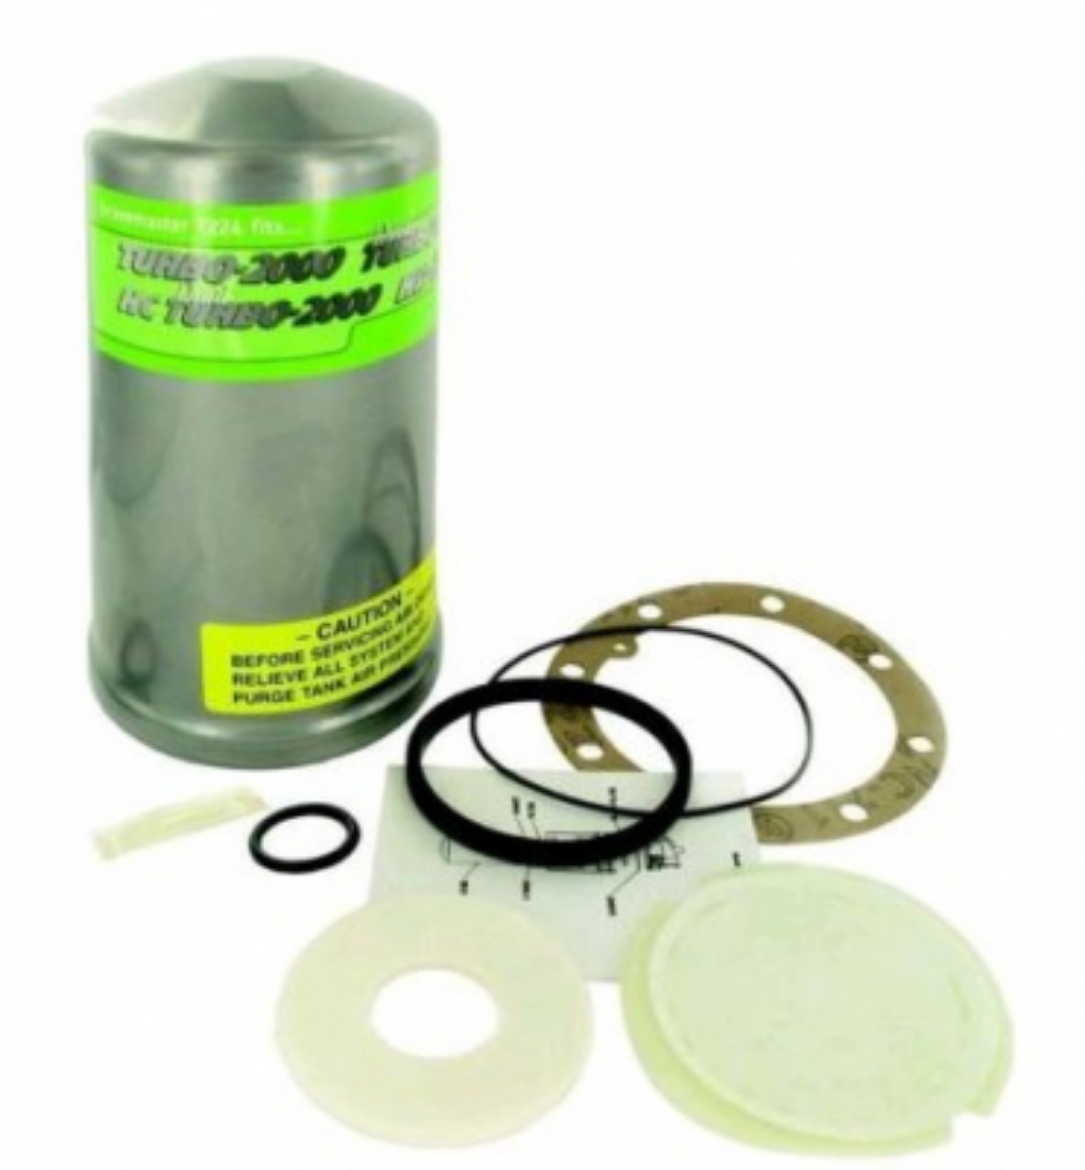 Picture of TURBO 2000 SERVICE KIT